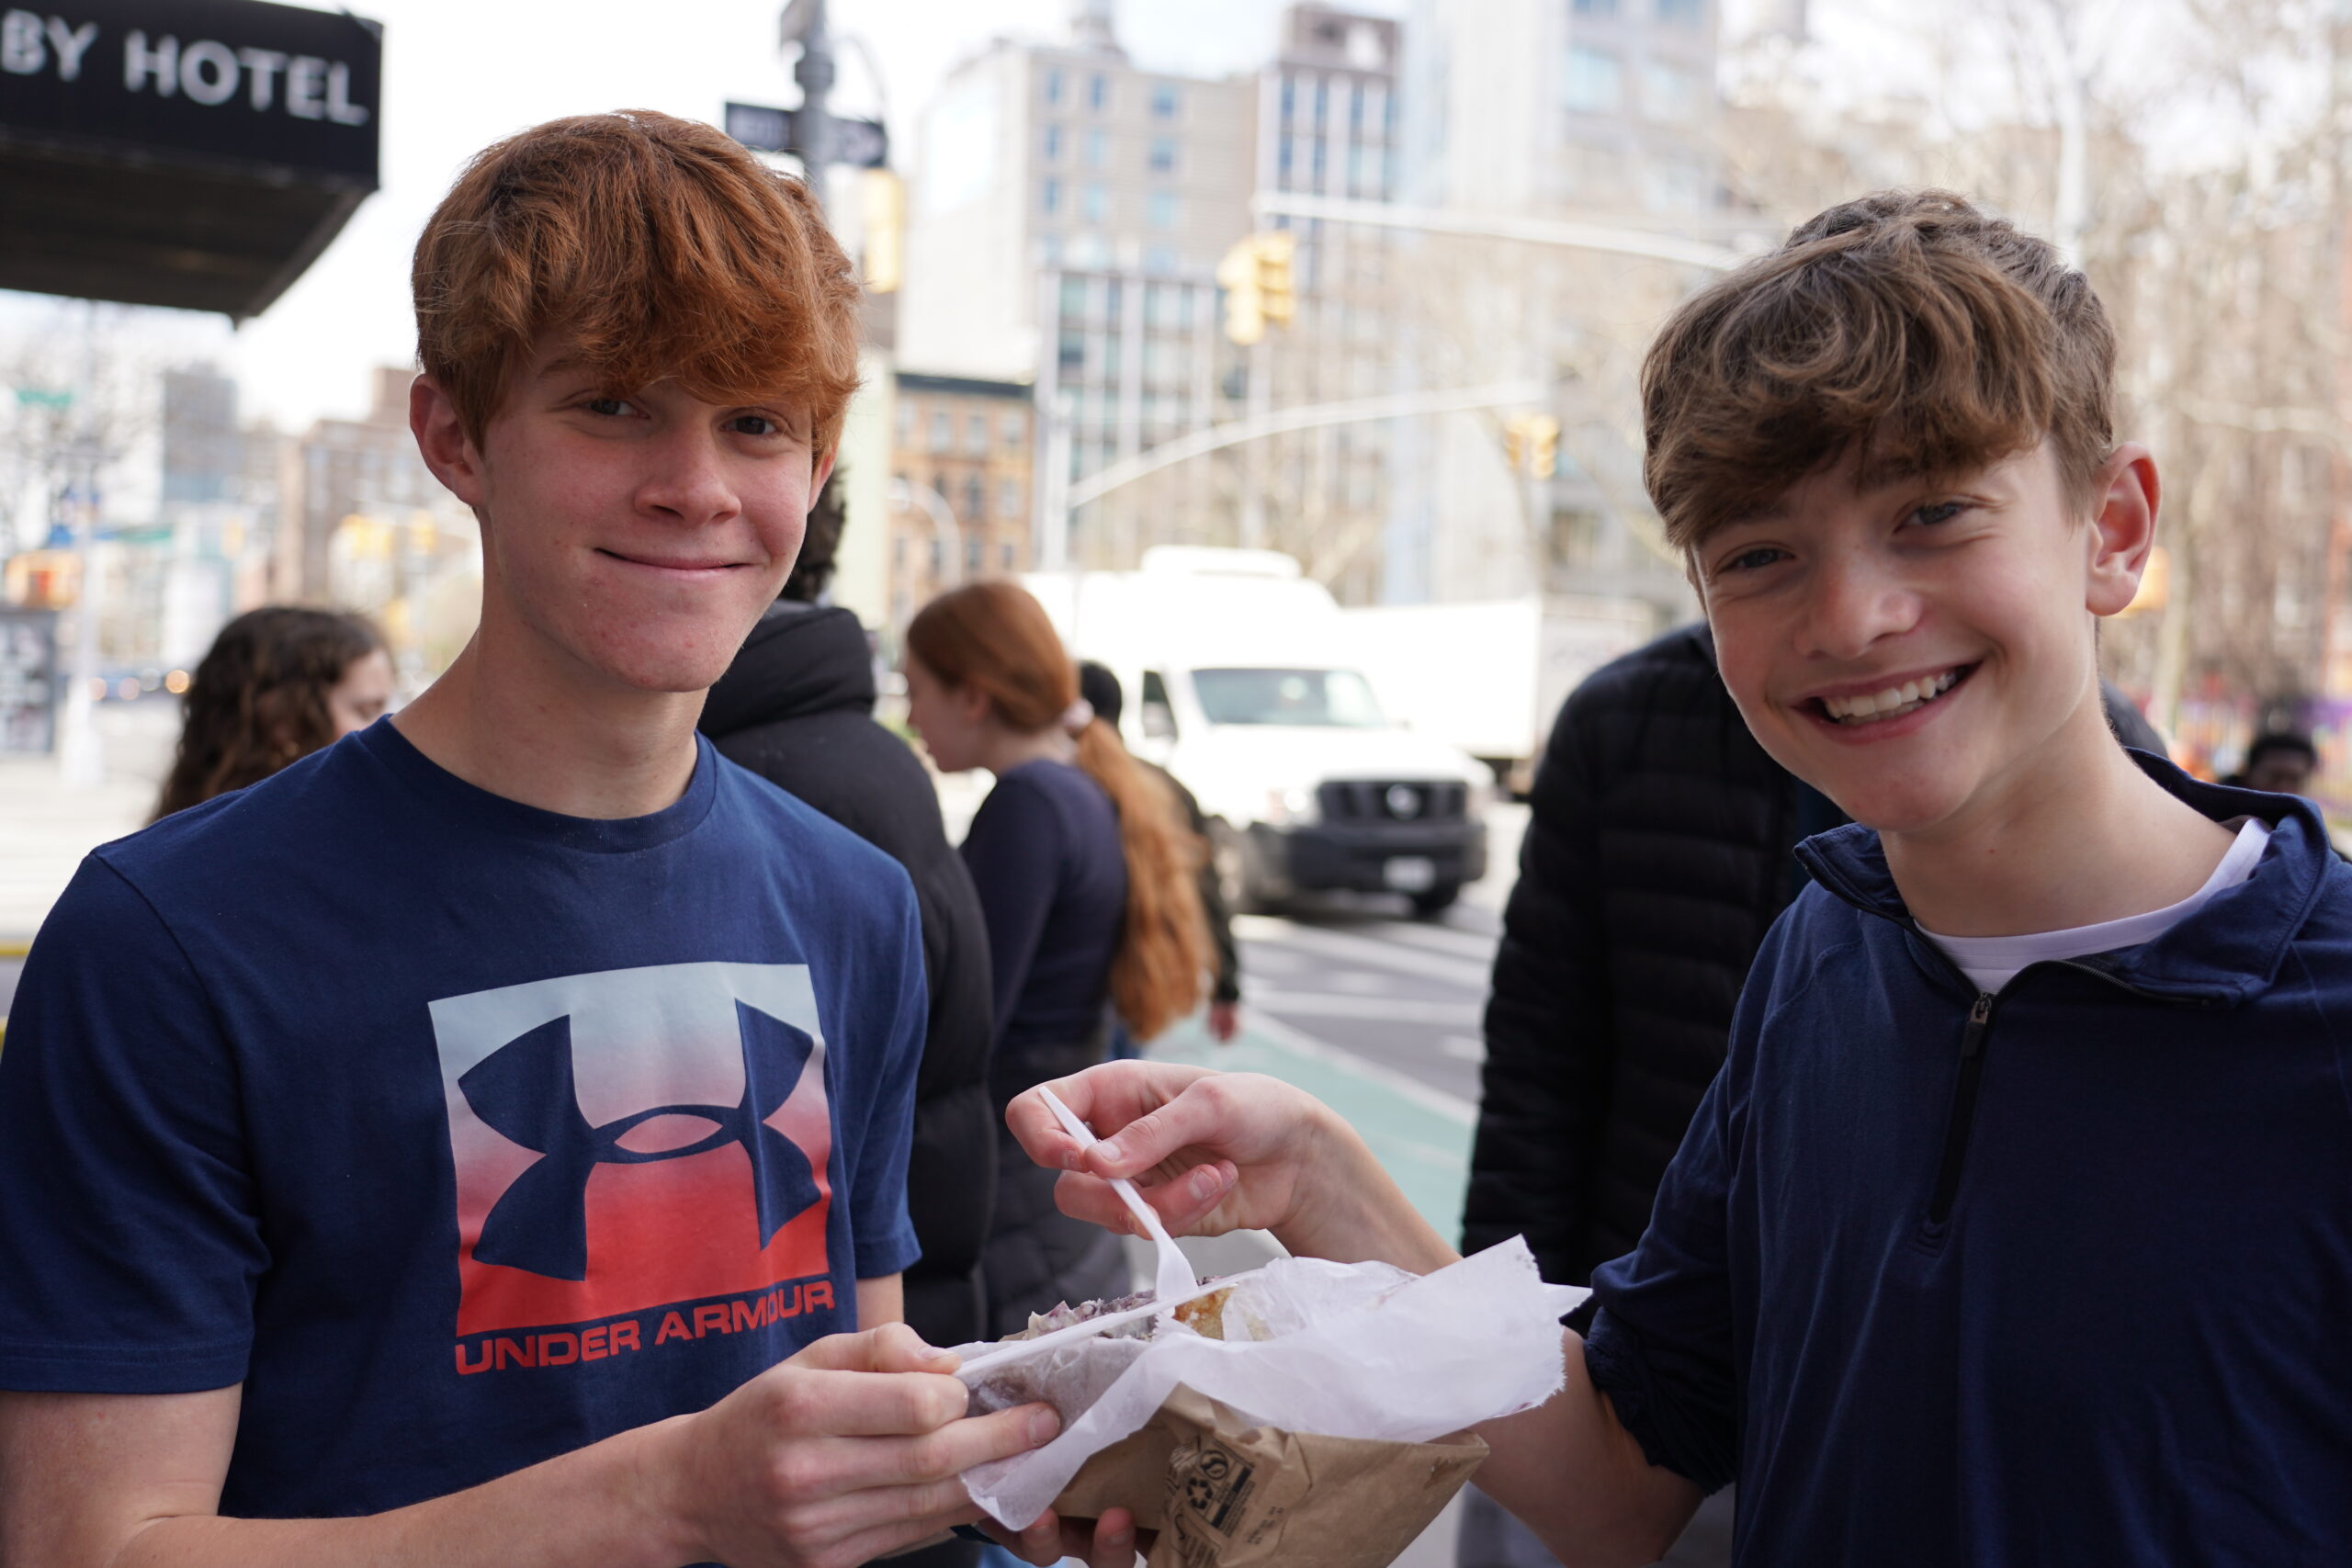 Jewish Affinity Group students go on a "Jewish Foods Tour" field trip throughout Manhattan.